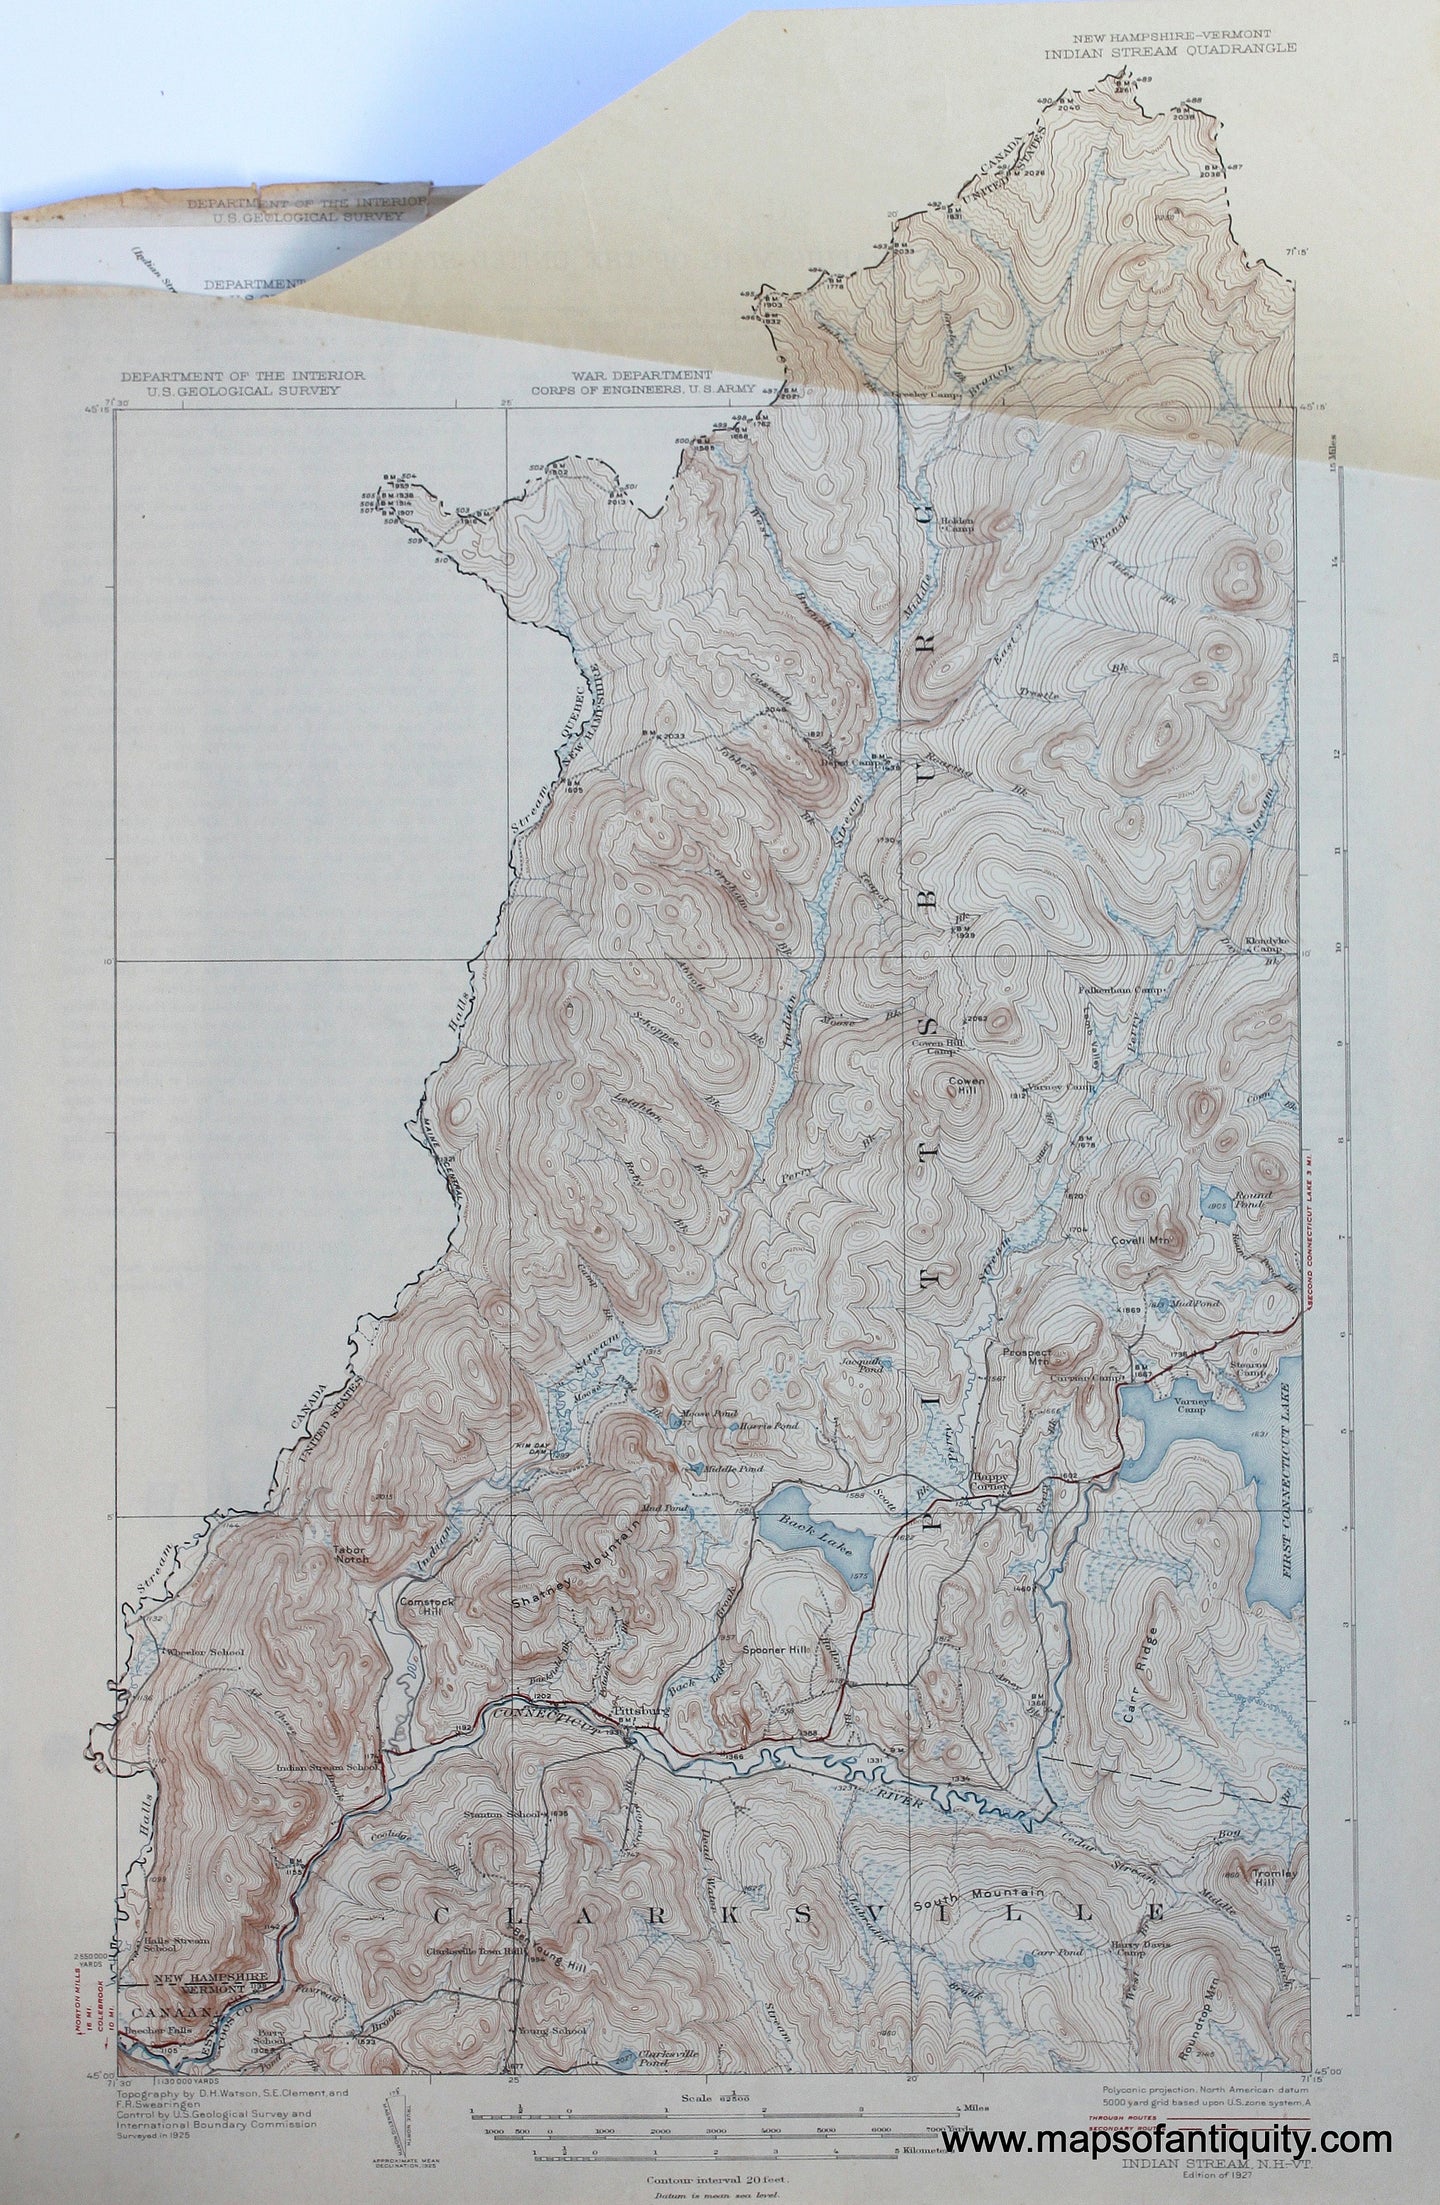 Genuine-Antique-Map-Indian-Stream-New-Hampshire-Vermont--1927-US-Geological-Survey--Maps-Of-Antiquity